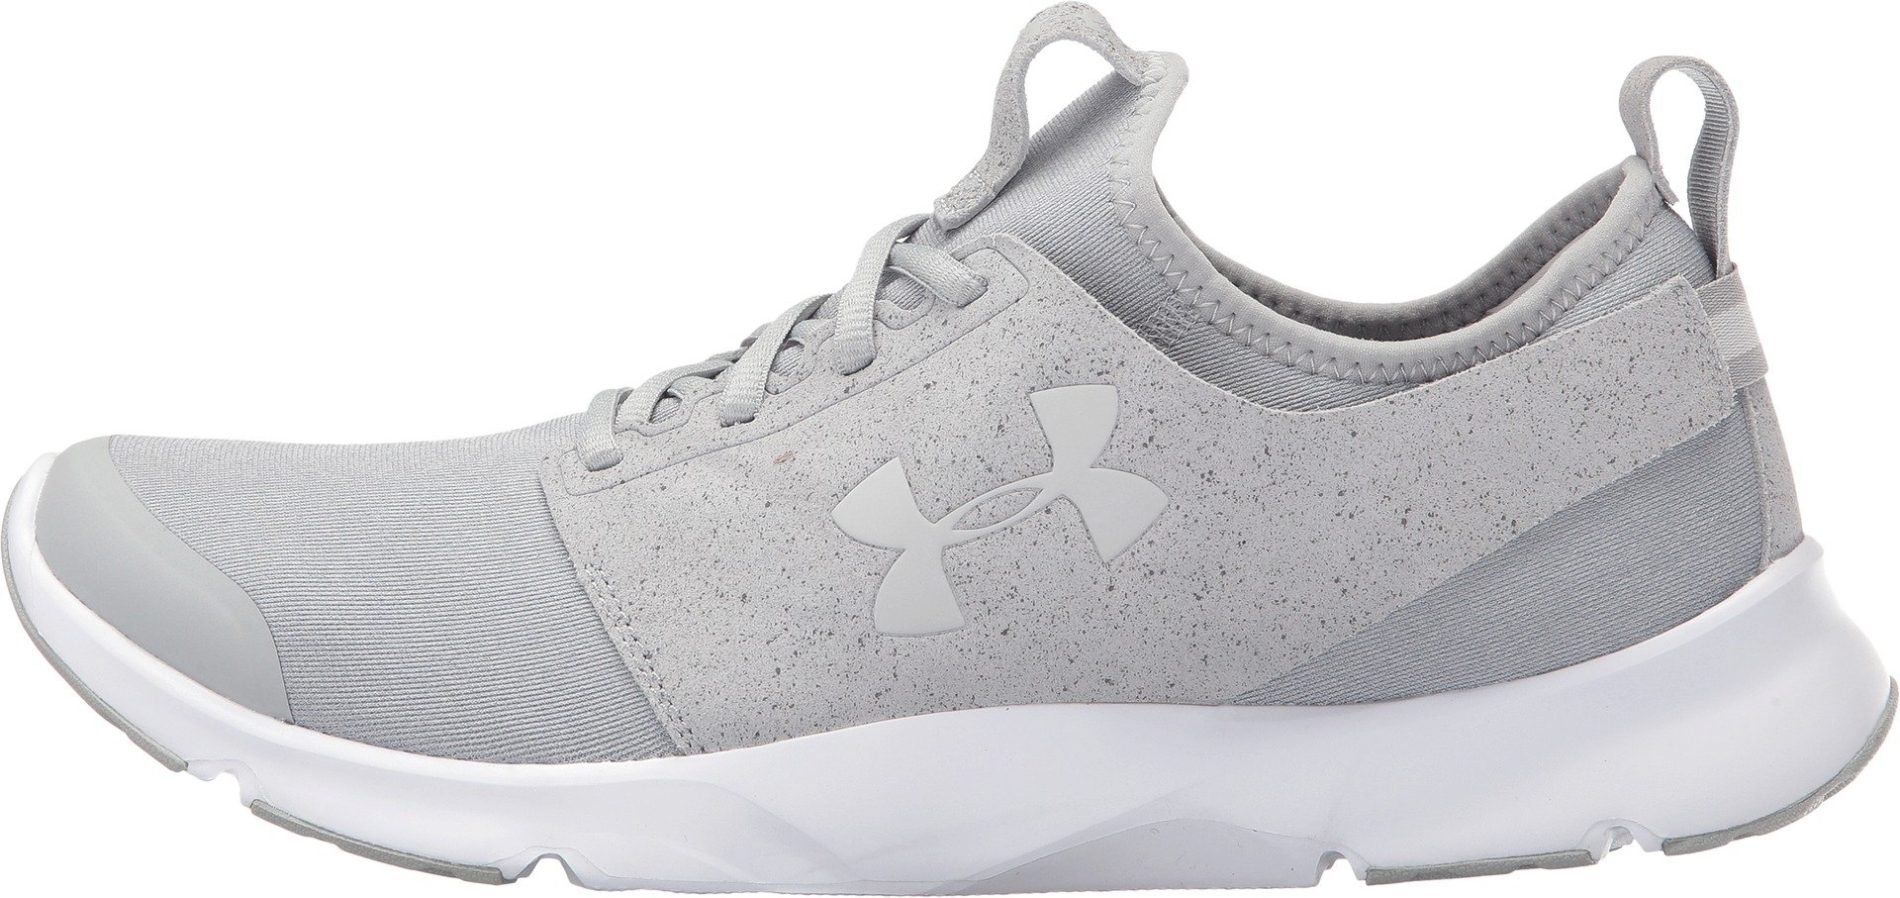 under armour drift trainers